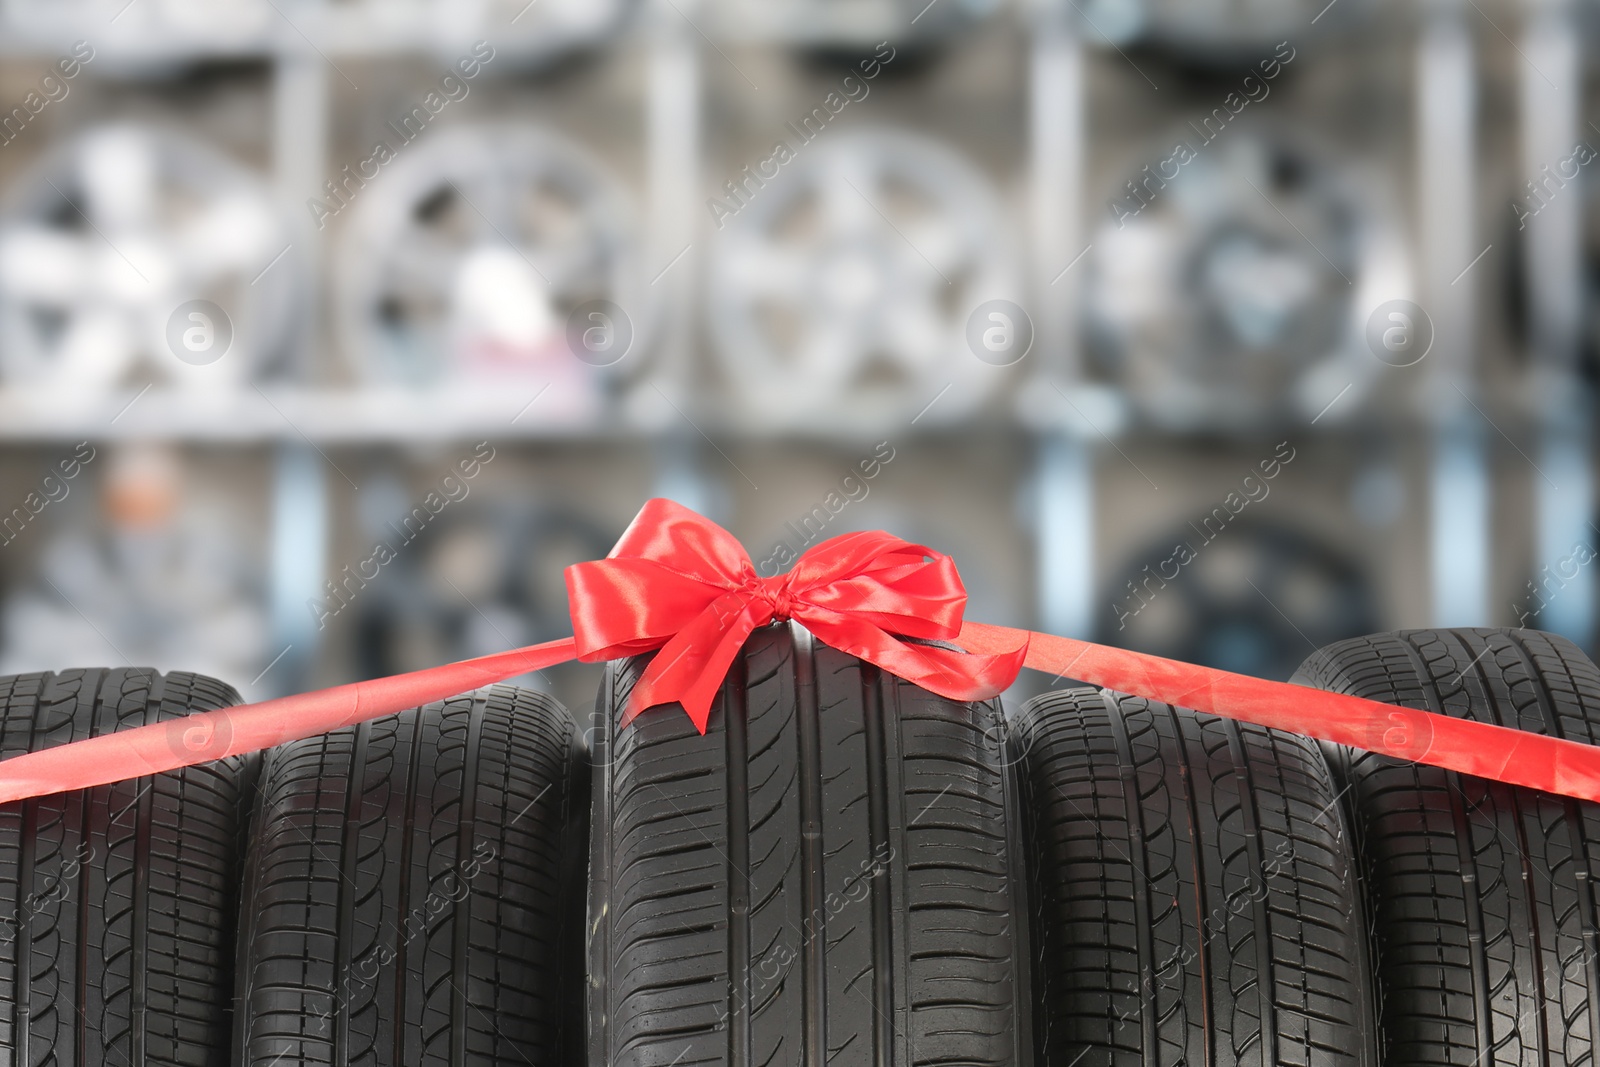 Image of Car tires tied with red ribbon in auto store